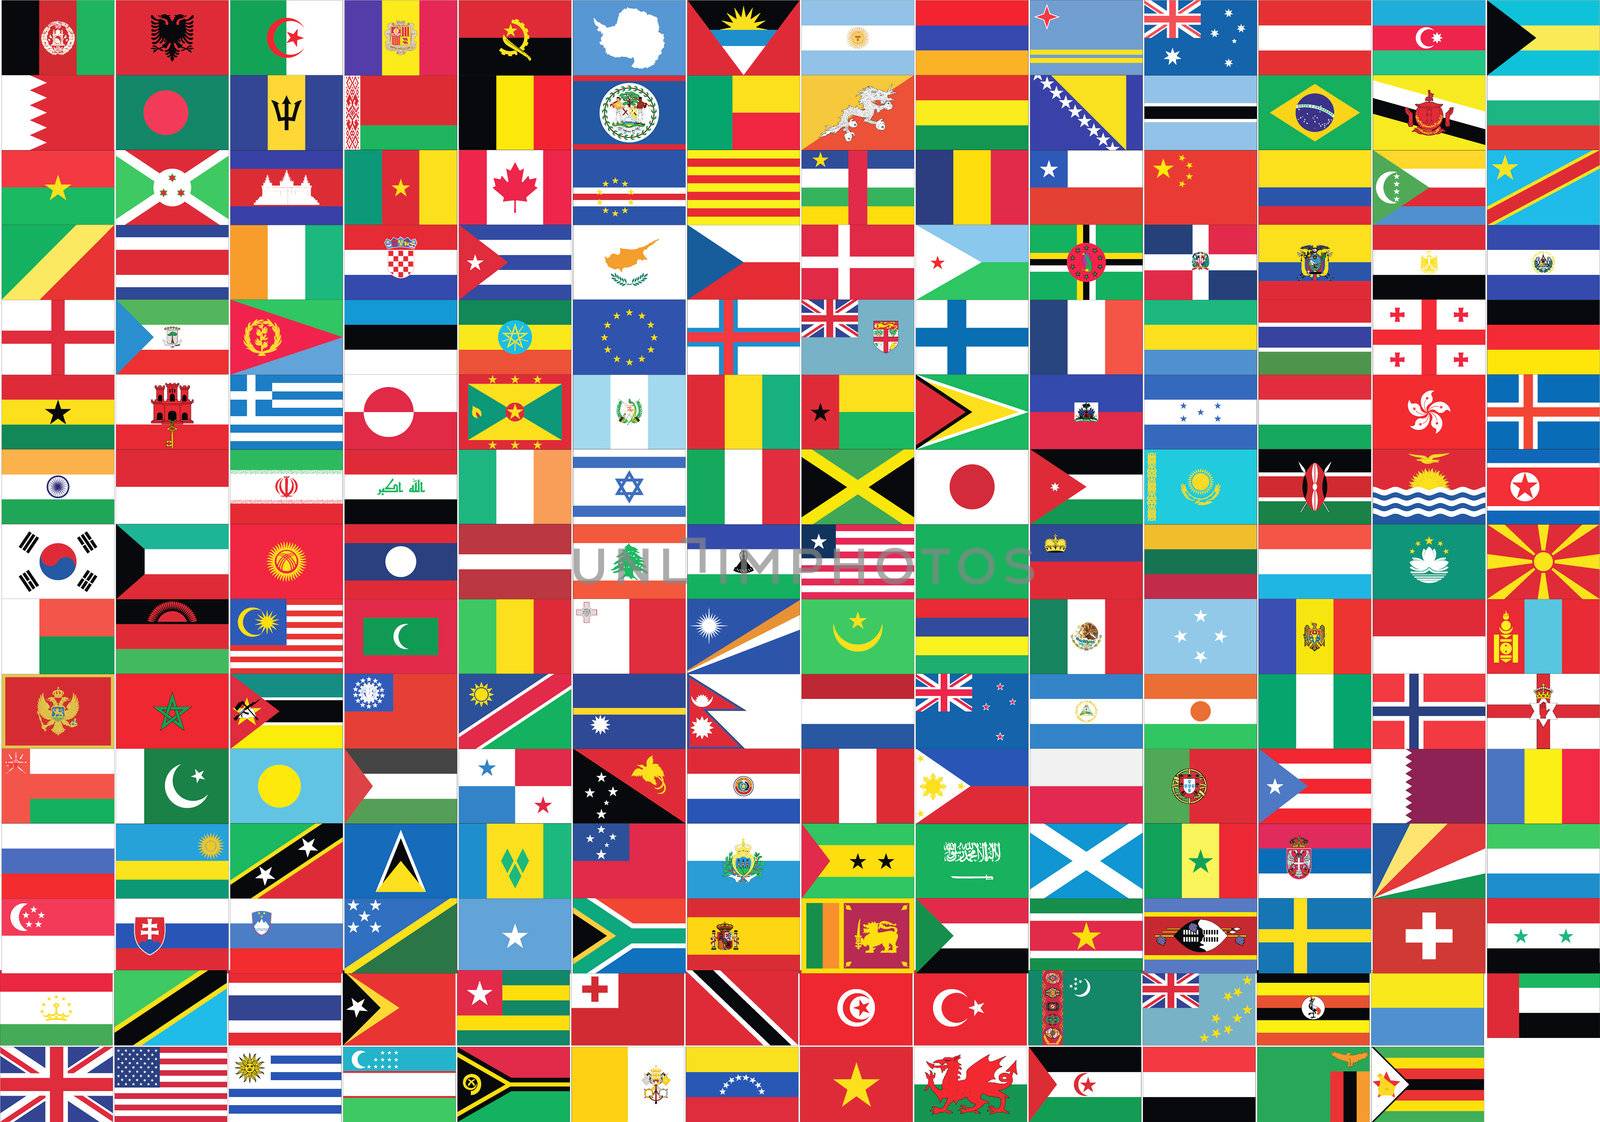 world flags giving a message of union by dacasdo